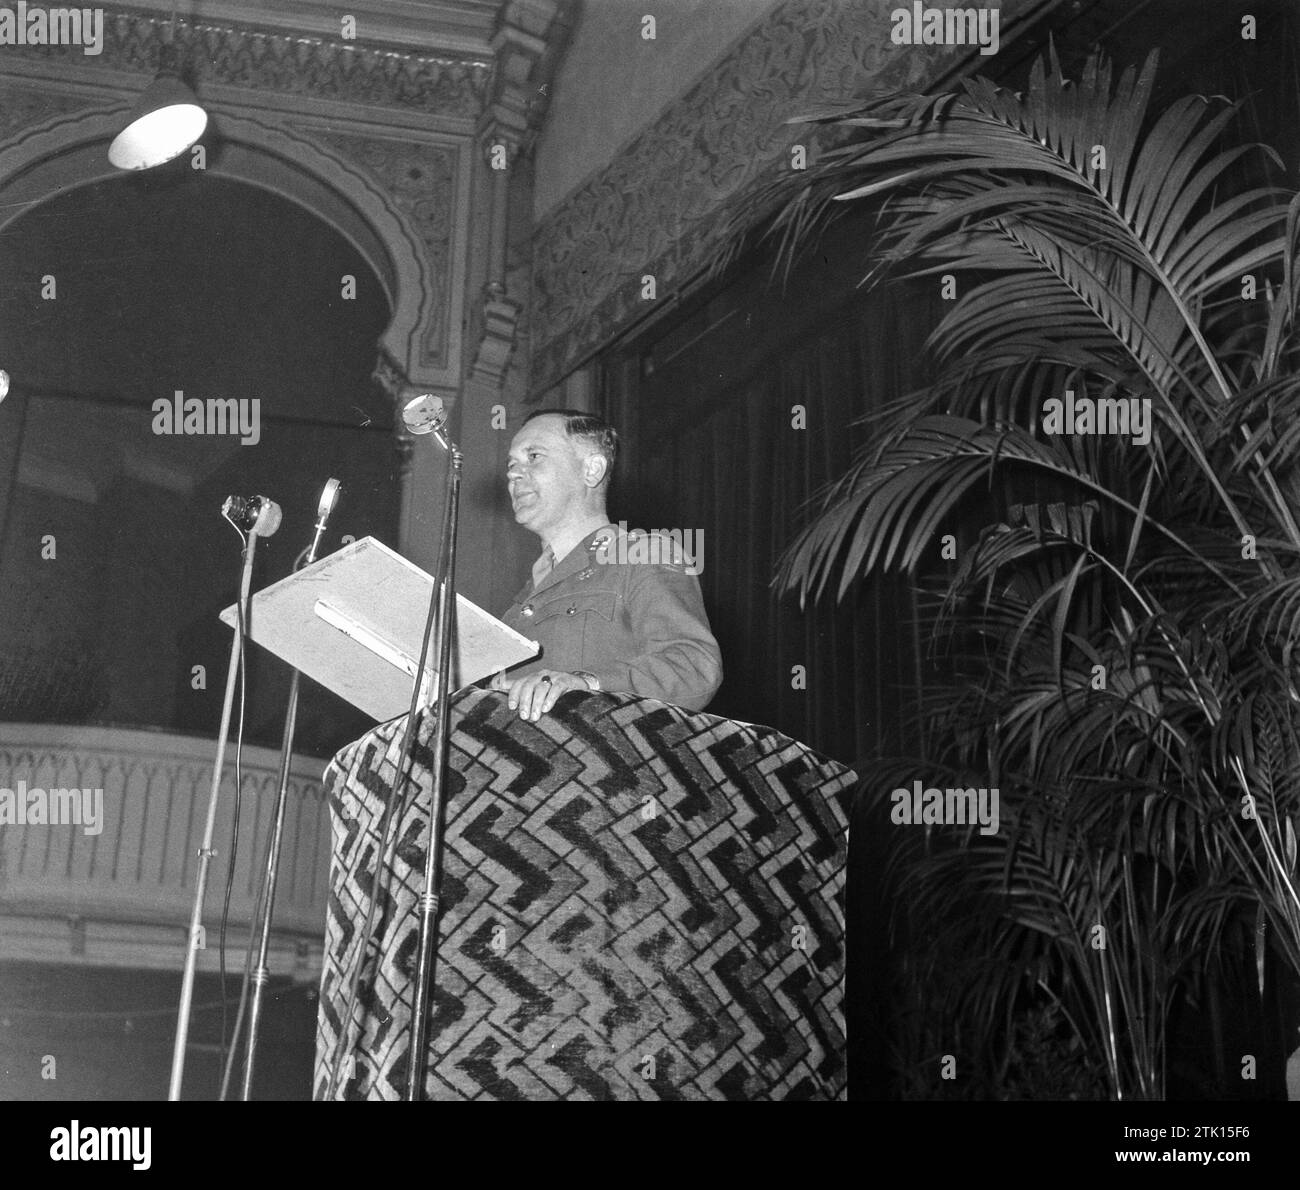 General Cross gives a speech in the hall of the Zoo in The Hague ca. October 26, 1945 Stock Photo